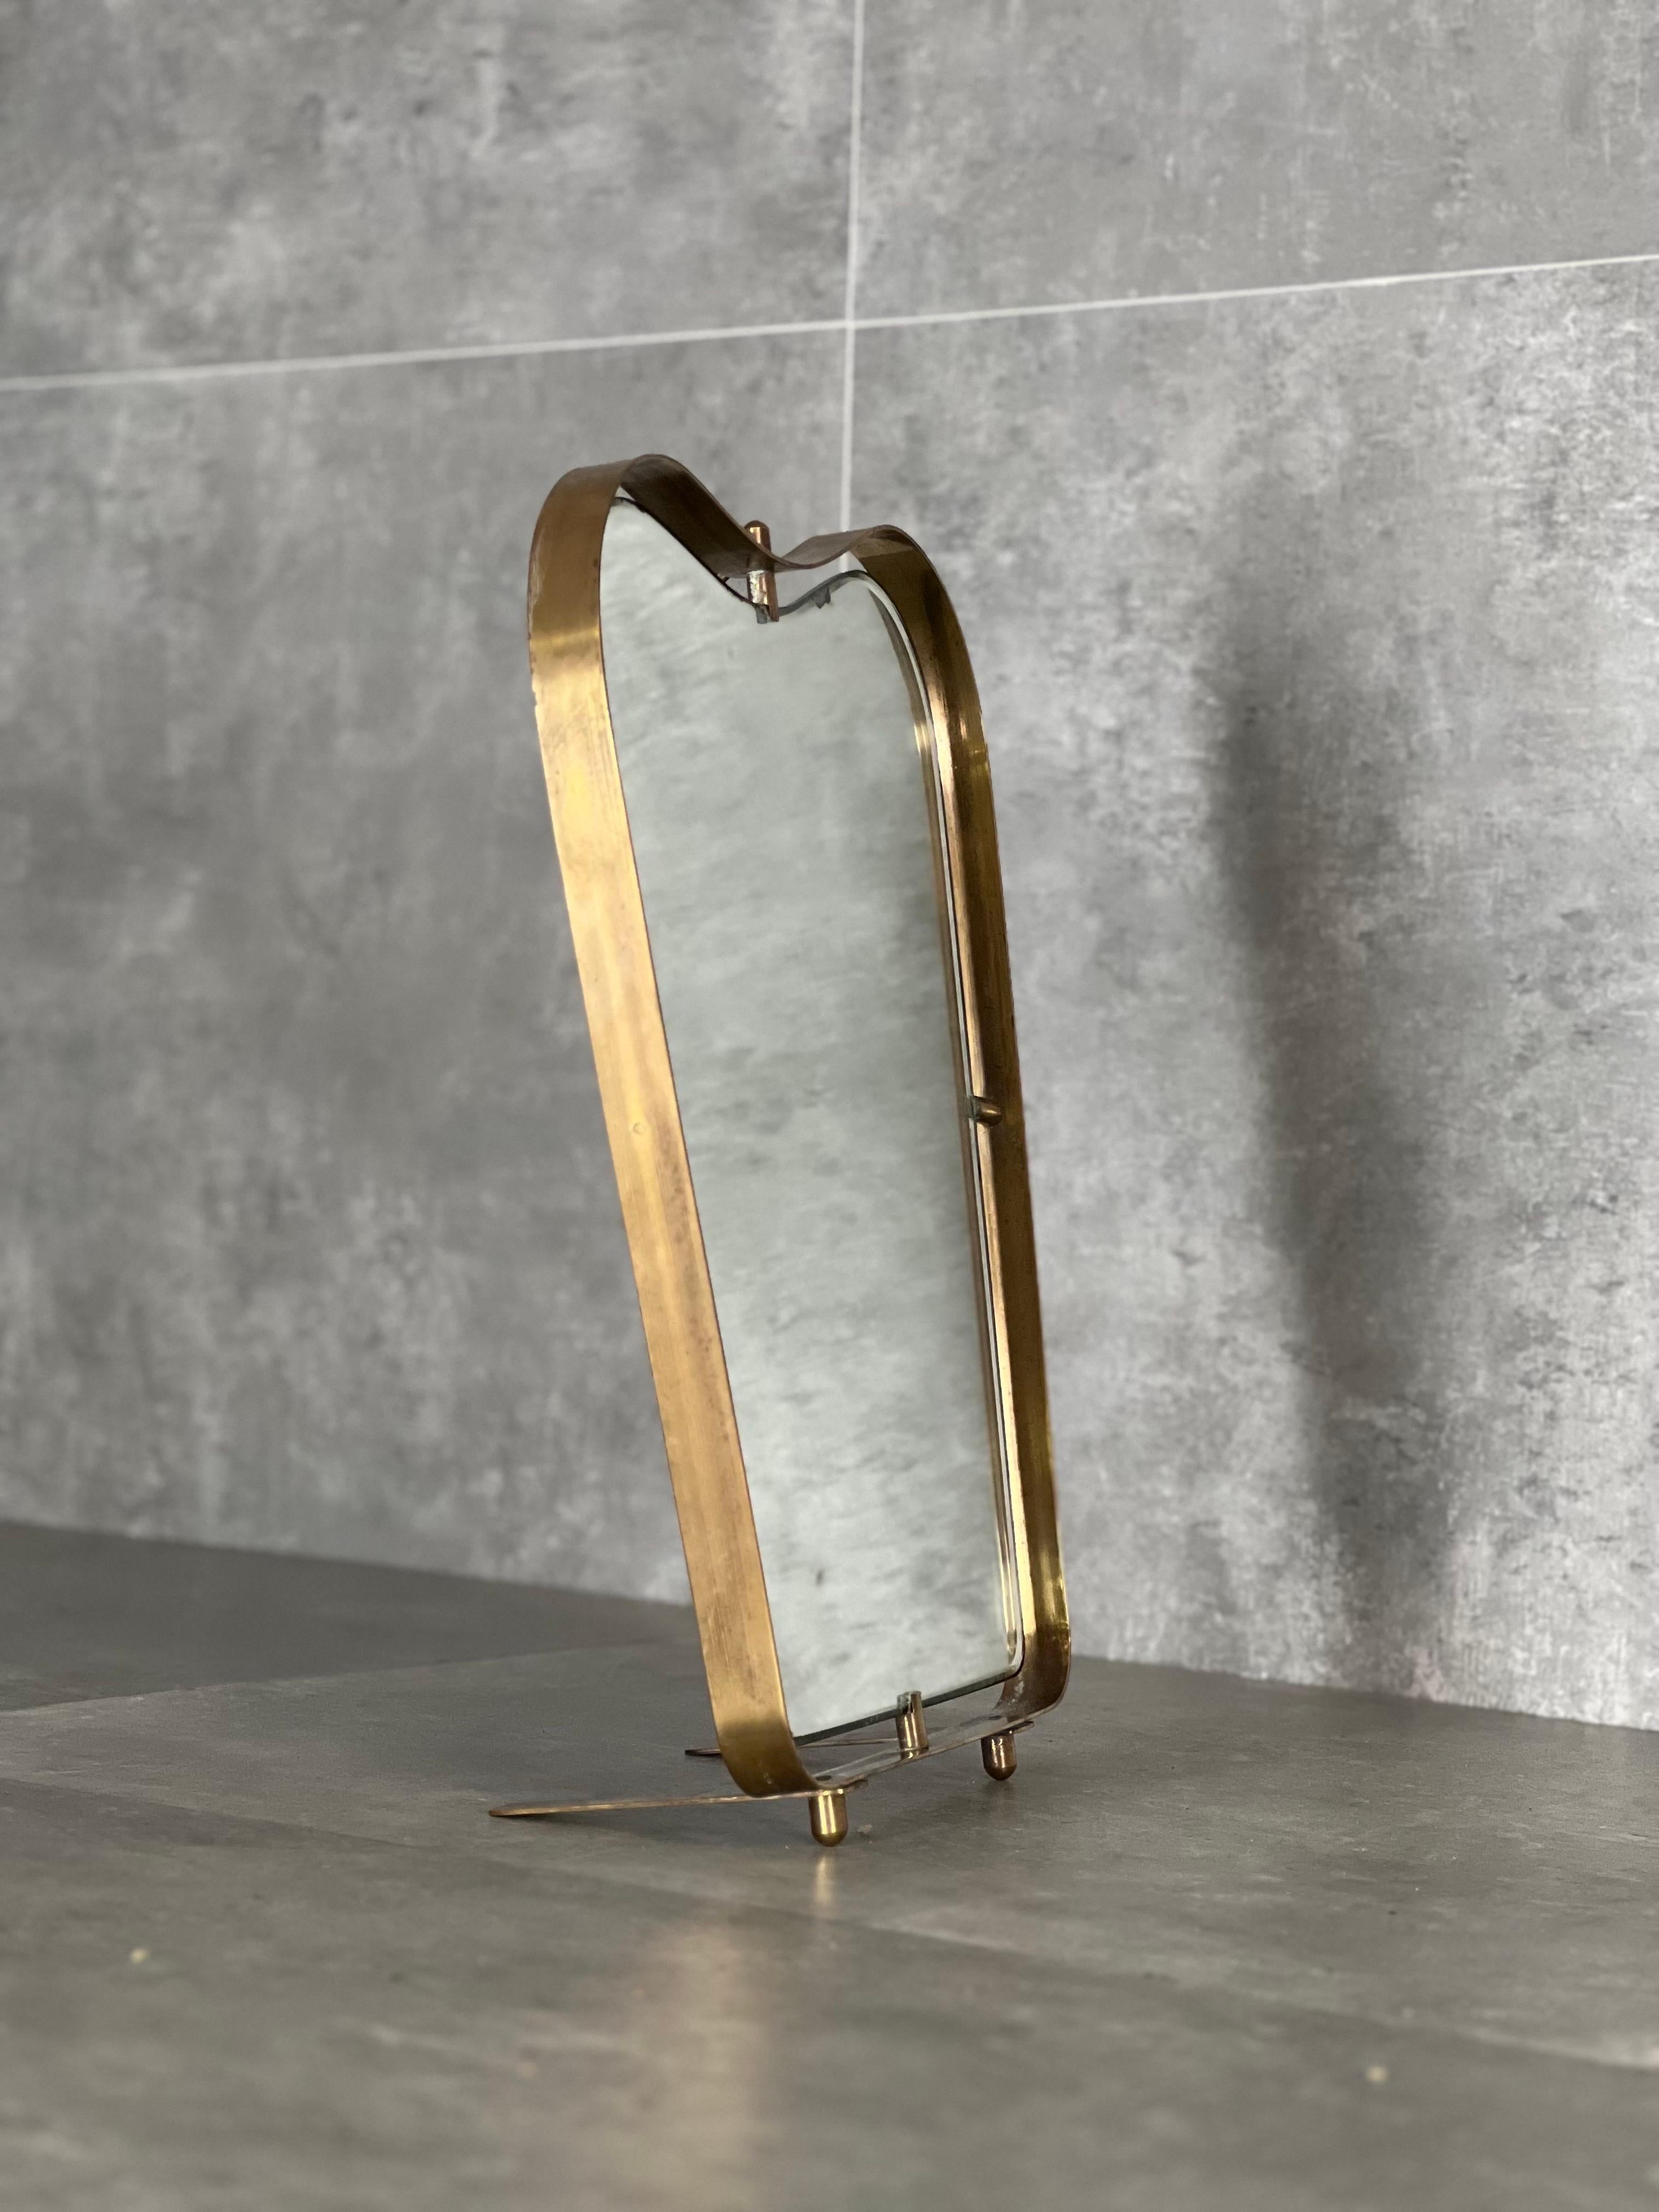 1950s wall or table brass mirror  In Good Condition For Sale In Quarrata, IT